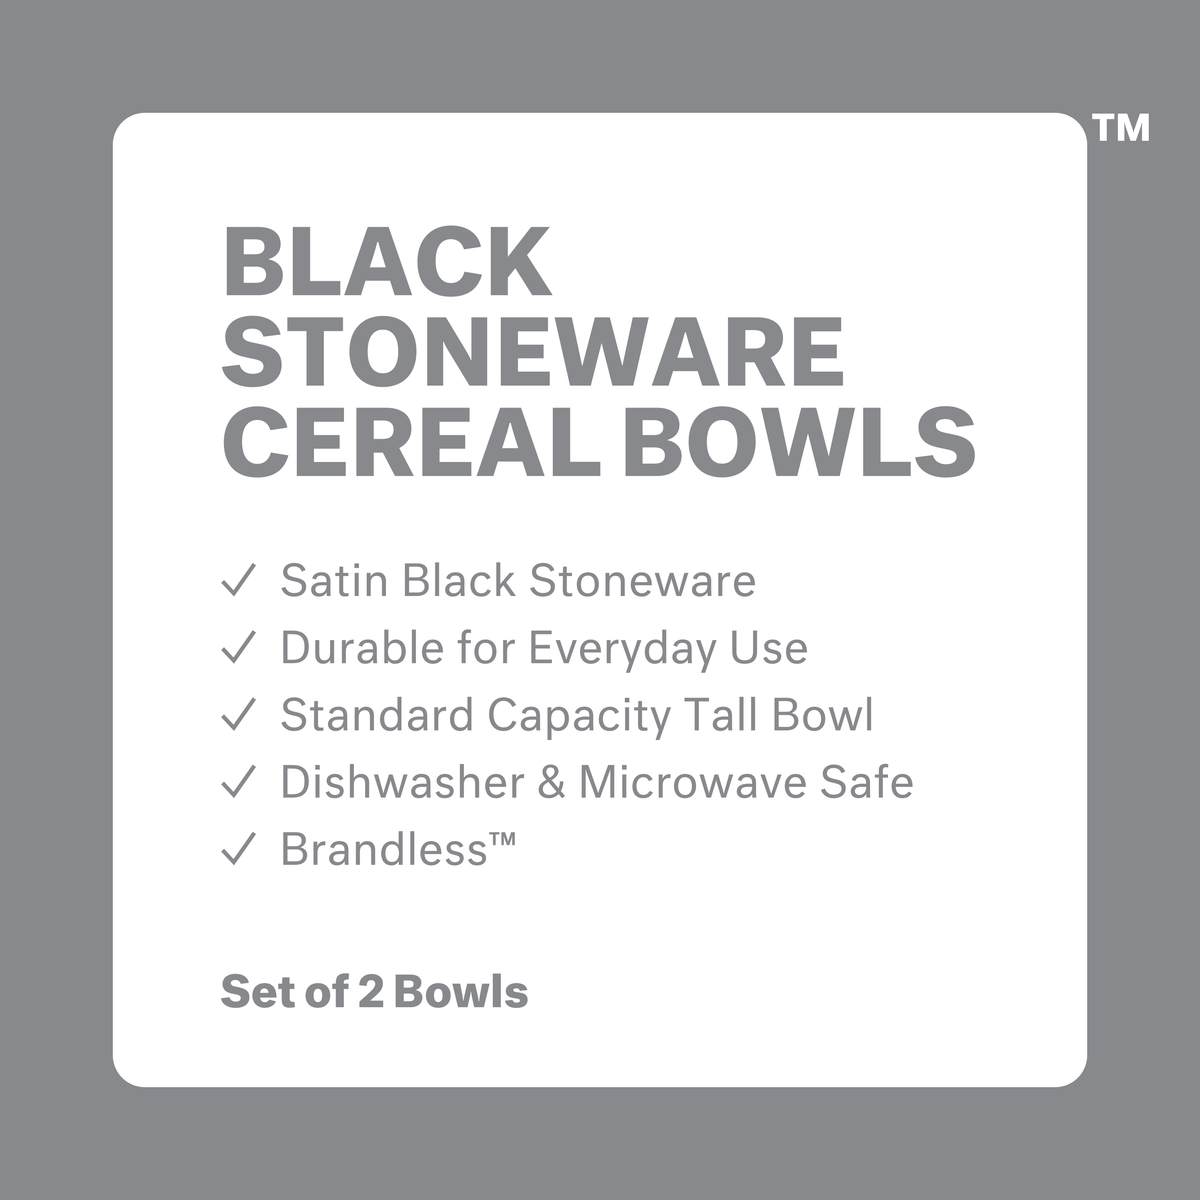 Black stoneware cereal bowls: satin black stoneware, durable for everyday use, standard capacity tall bowl, dishwasher and microwave safe, brandless. Set of 2 bowls.